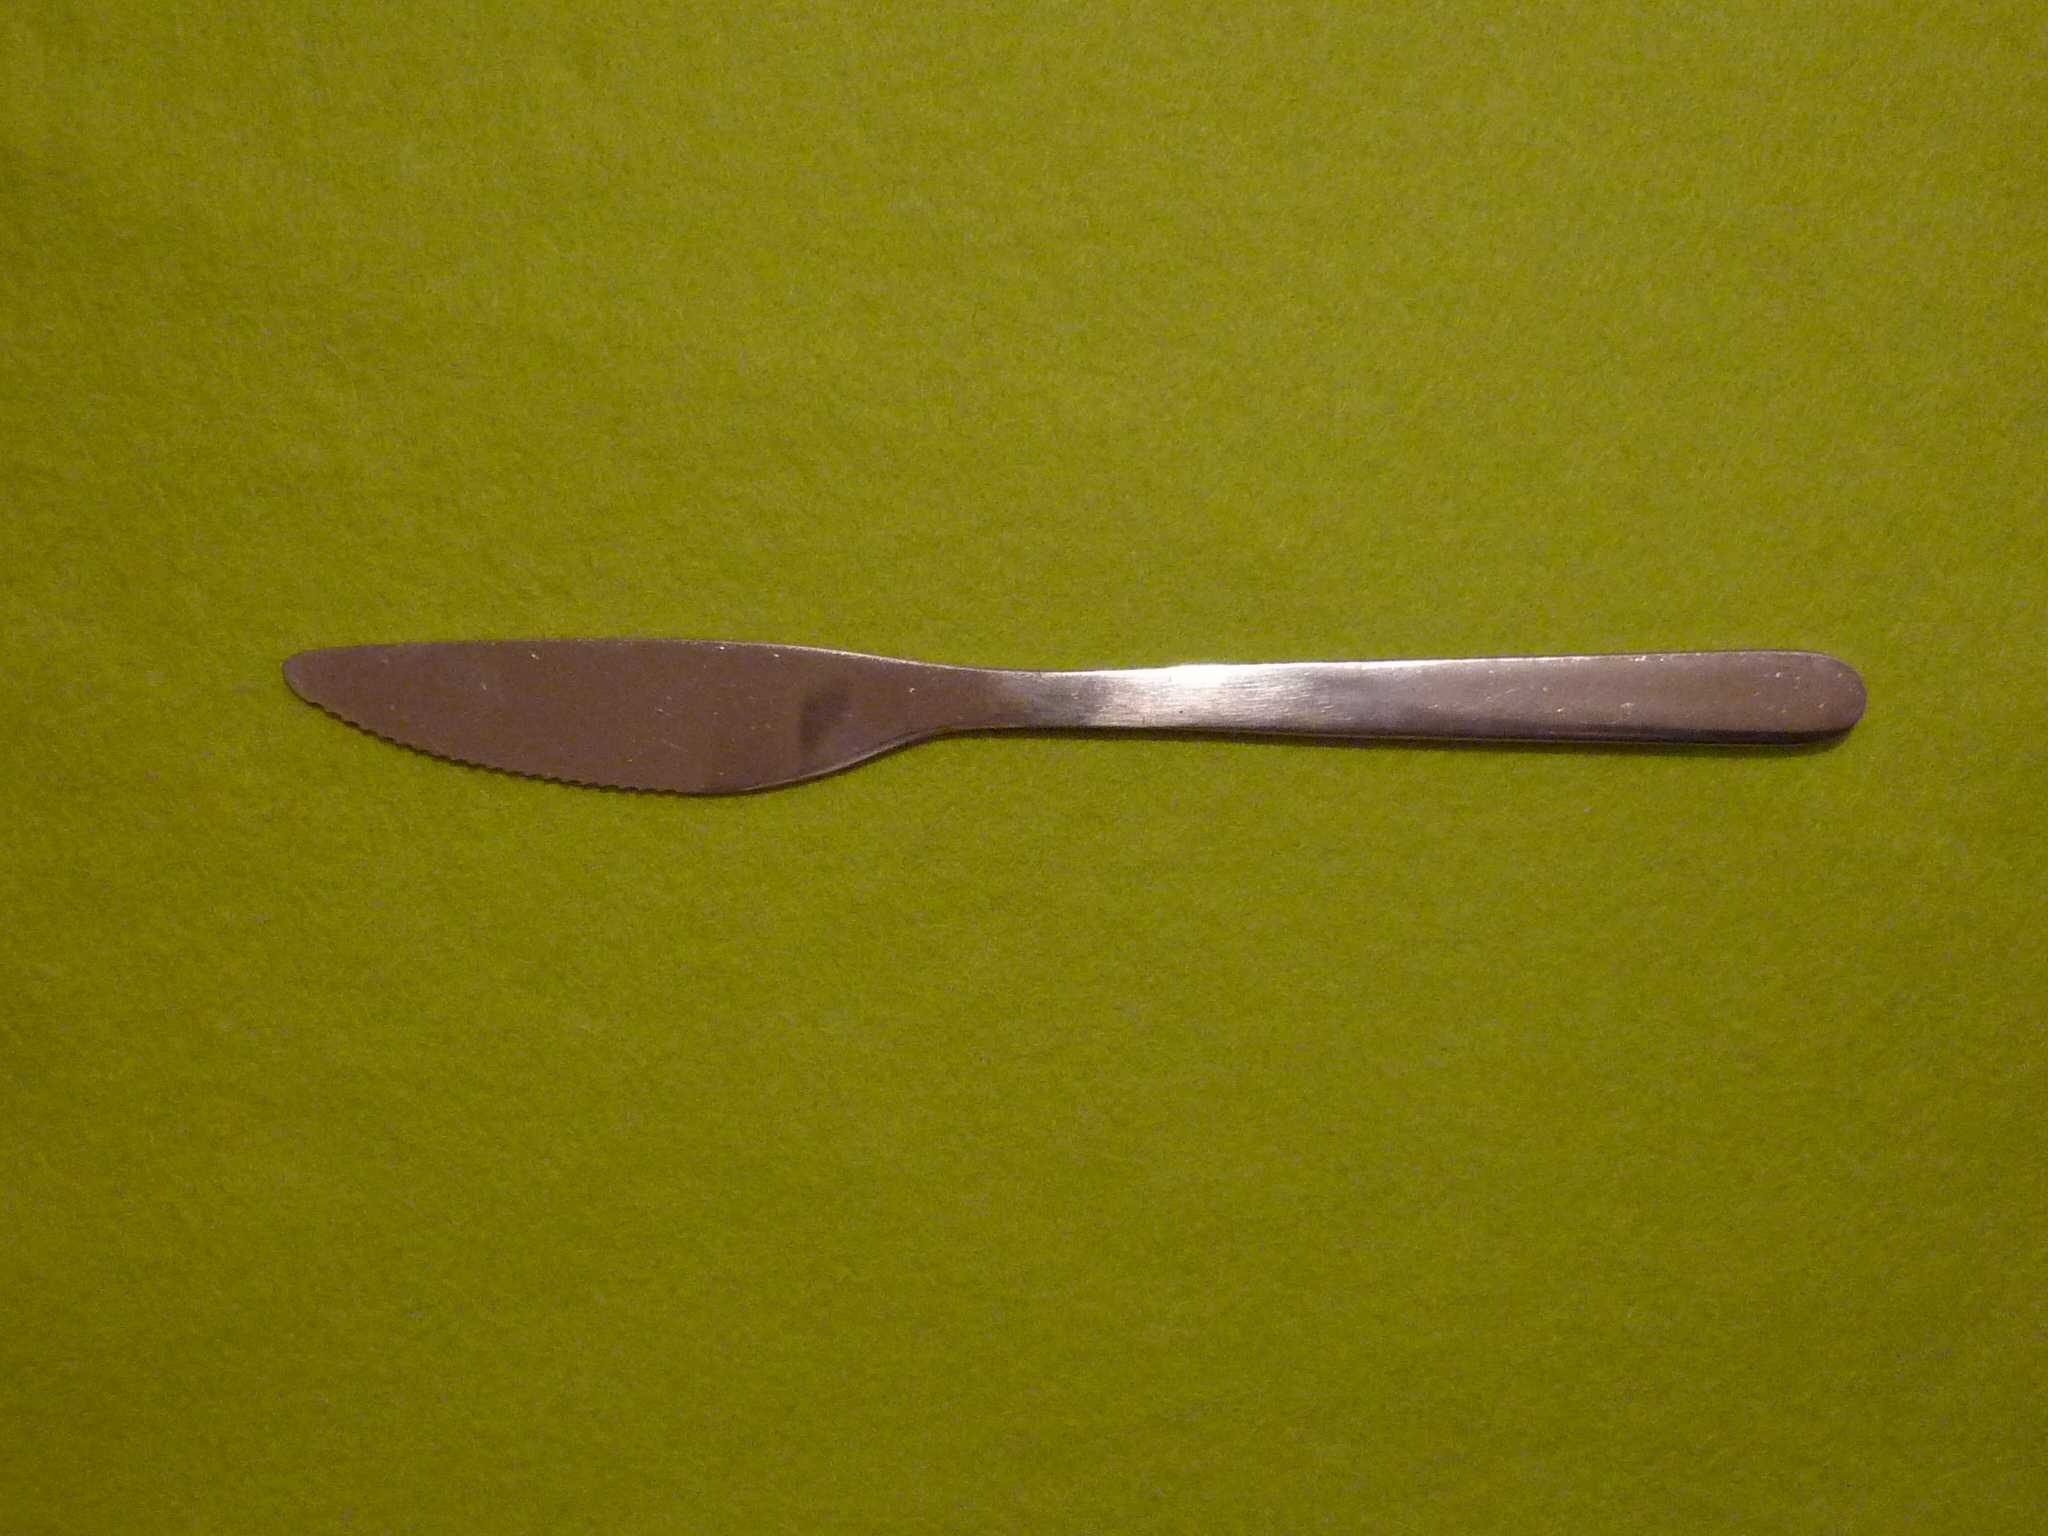 Dinner knife image classifcation dataset for machine learning